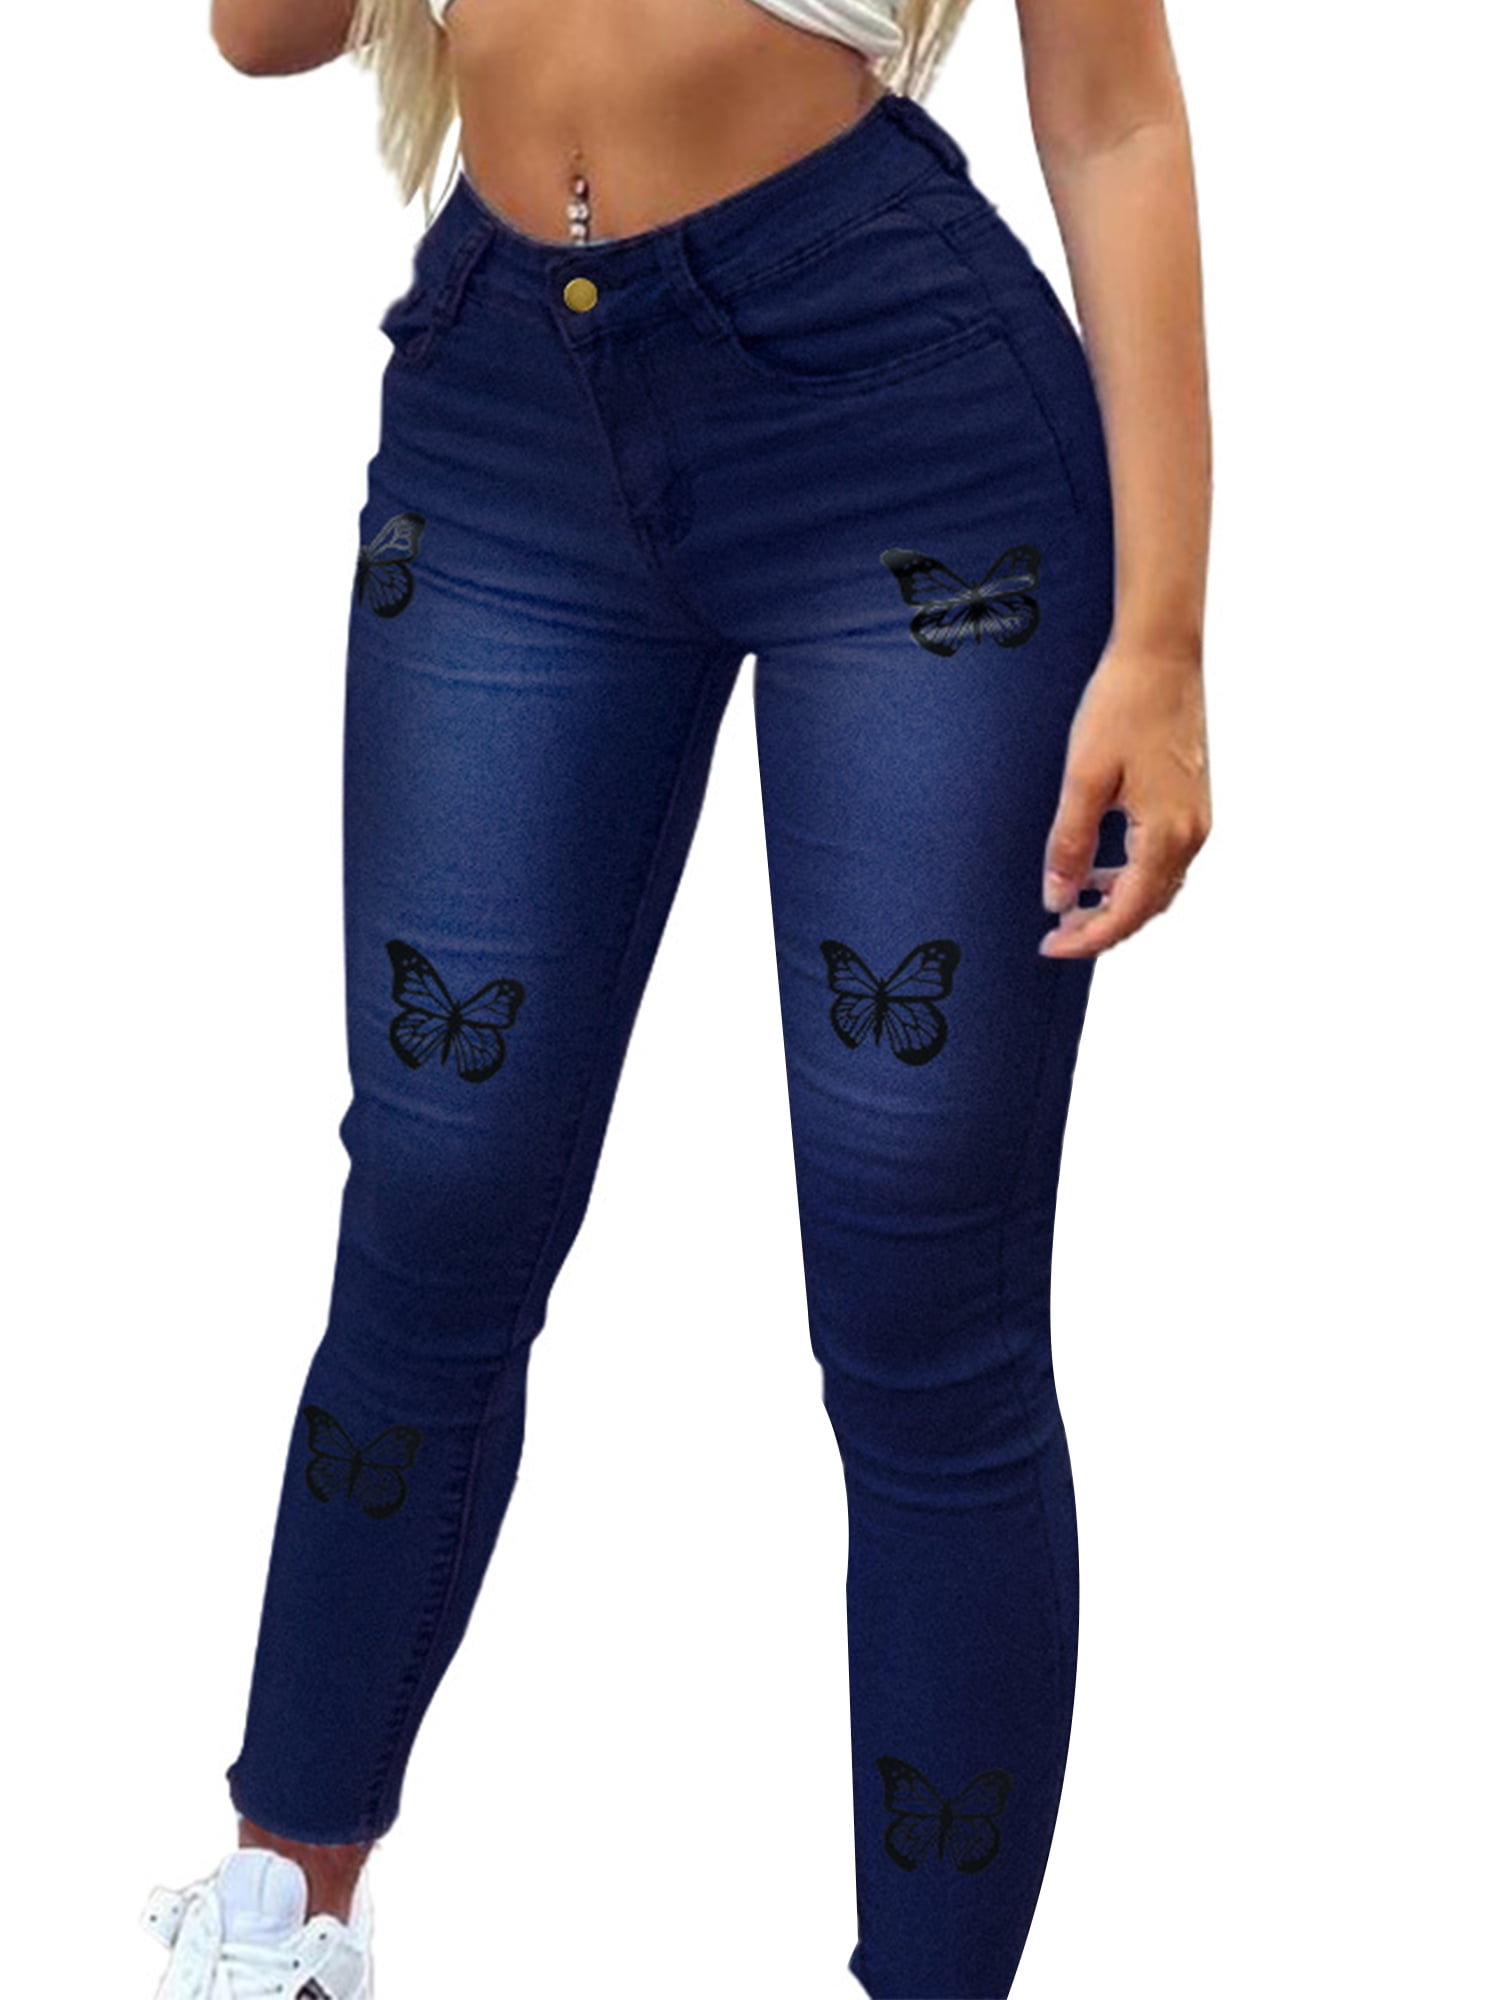 Grianlook Womens Jeans Cute Graphic Print Denim Pants Slim Skinny Stretchy  Trousers with Pokets 